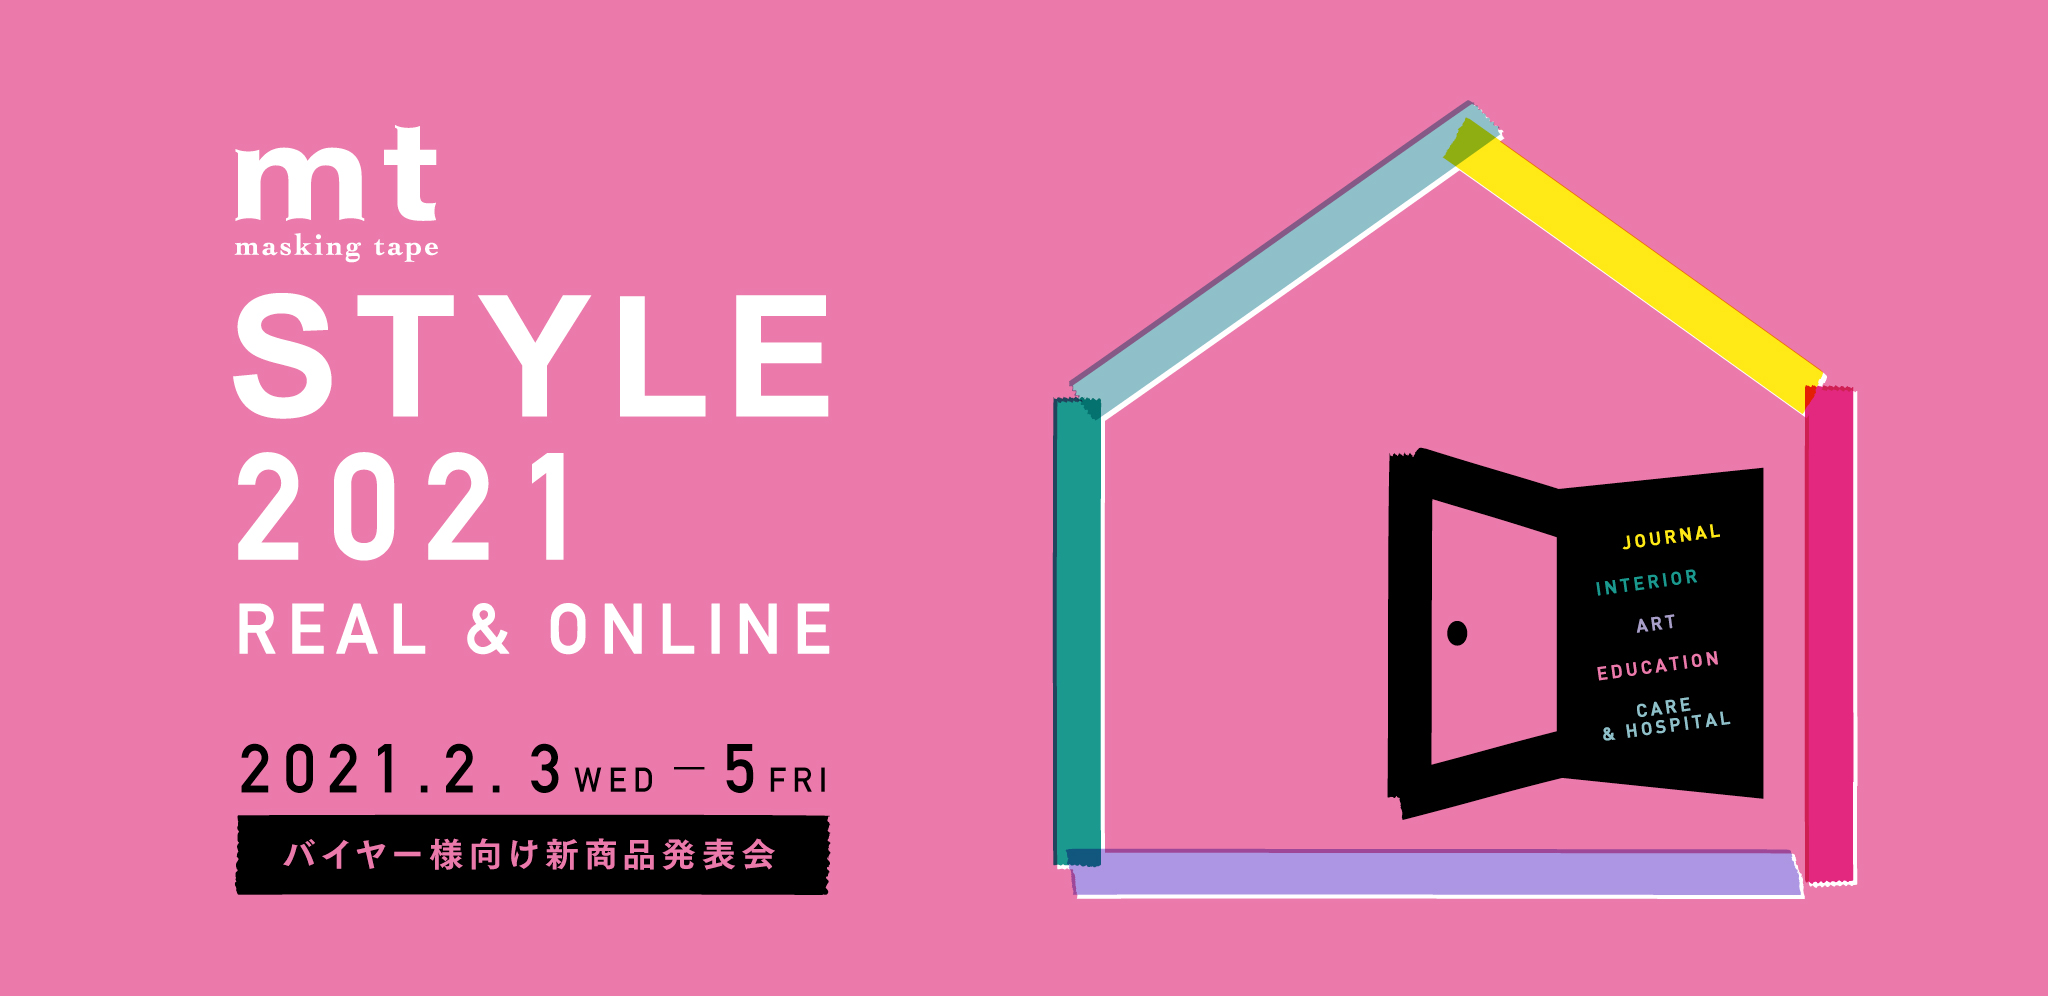 mt STYLE 2021 REAL&ONLINE 2021.2.3WED-3FRI